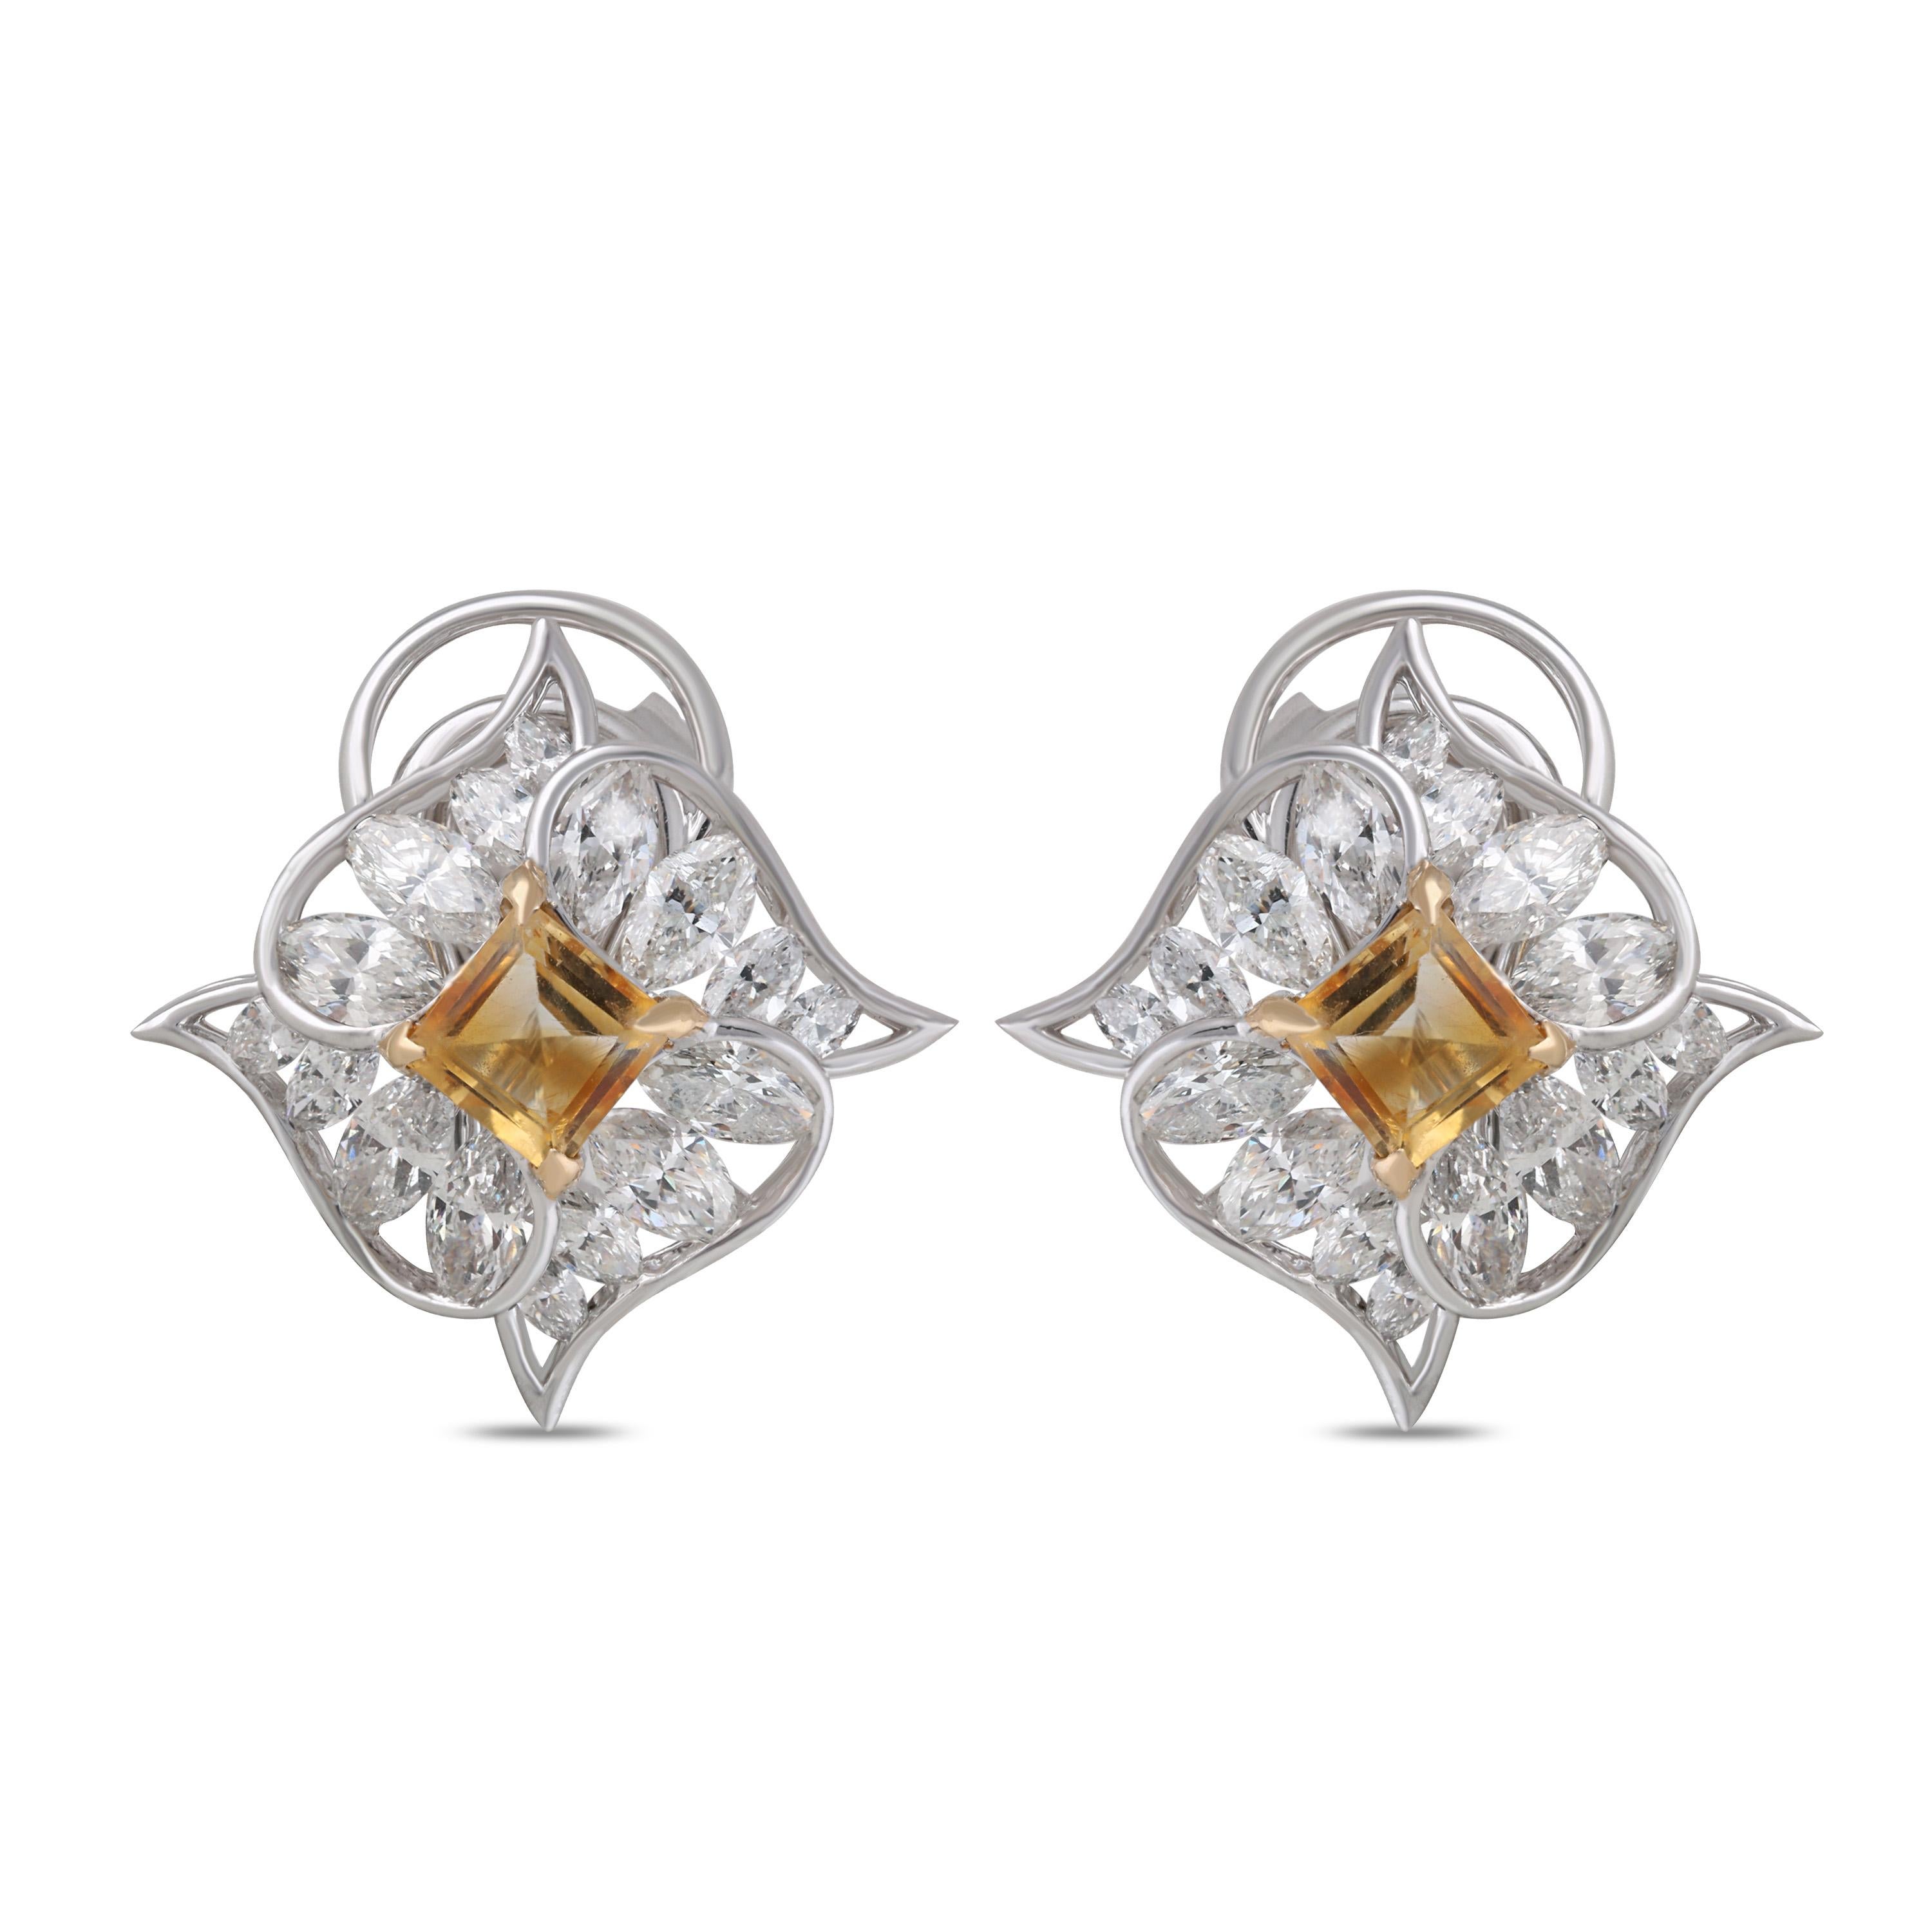 Marquise Cut Studio Rêves Edgy Diamond and Citrine Stud Earrings in 18 Karat Gold For Sale